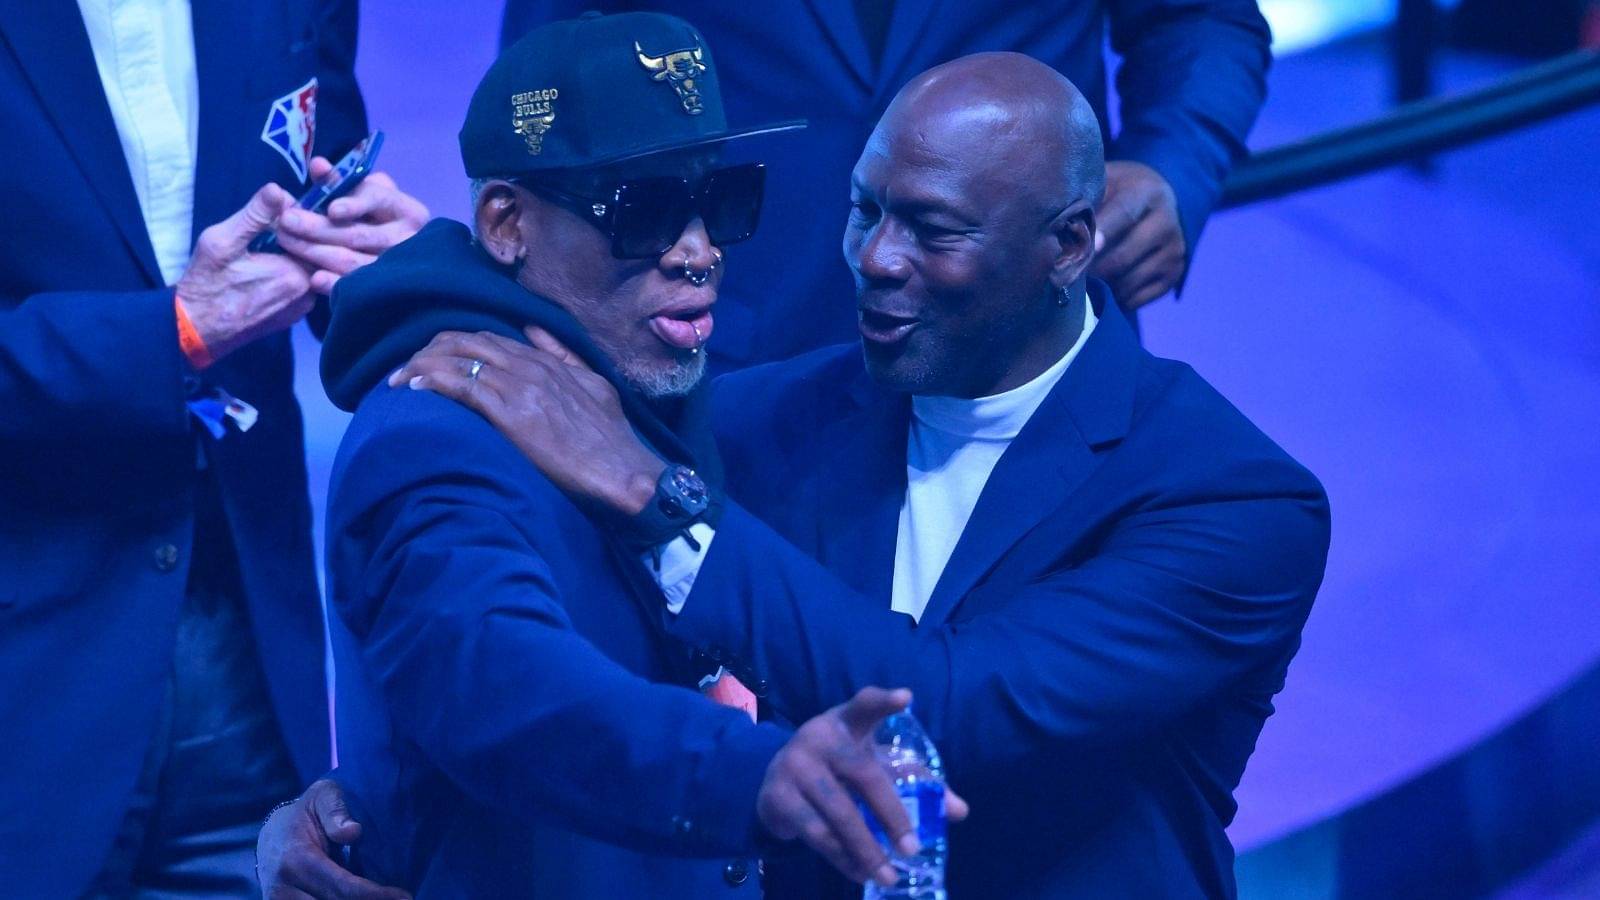 "I'd have 10-15-20-30 shots of Jagermeister and go home at 5": Dennis Rodman's regime while playing with Michael Jordan was bizarre